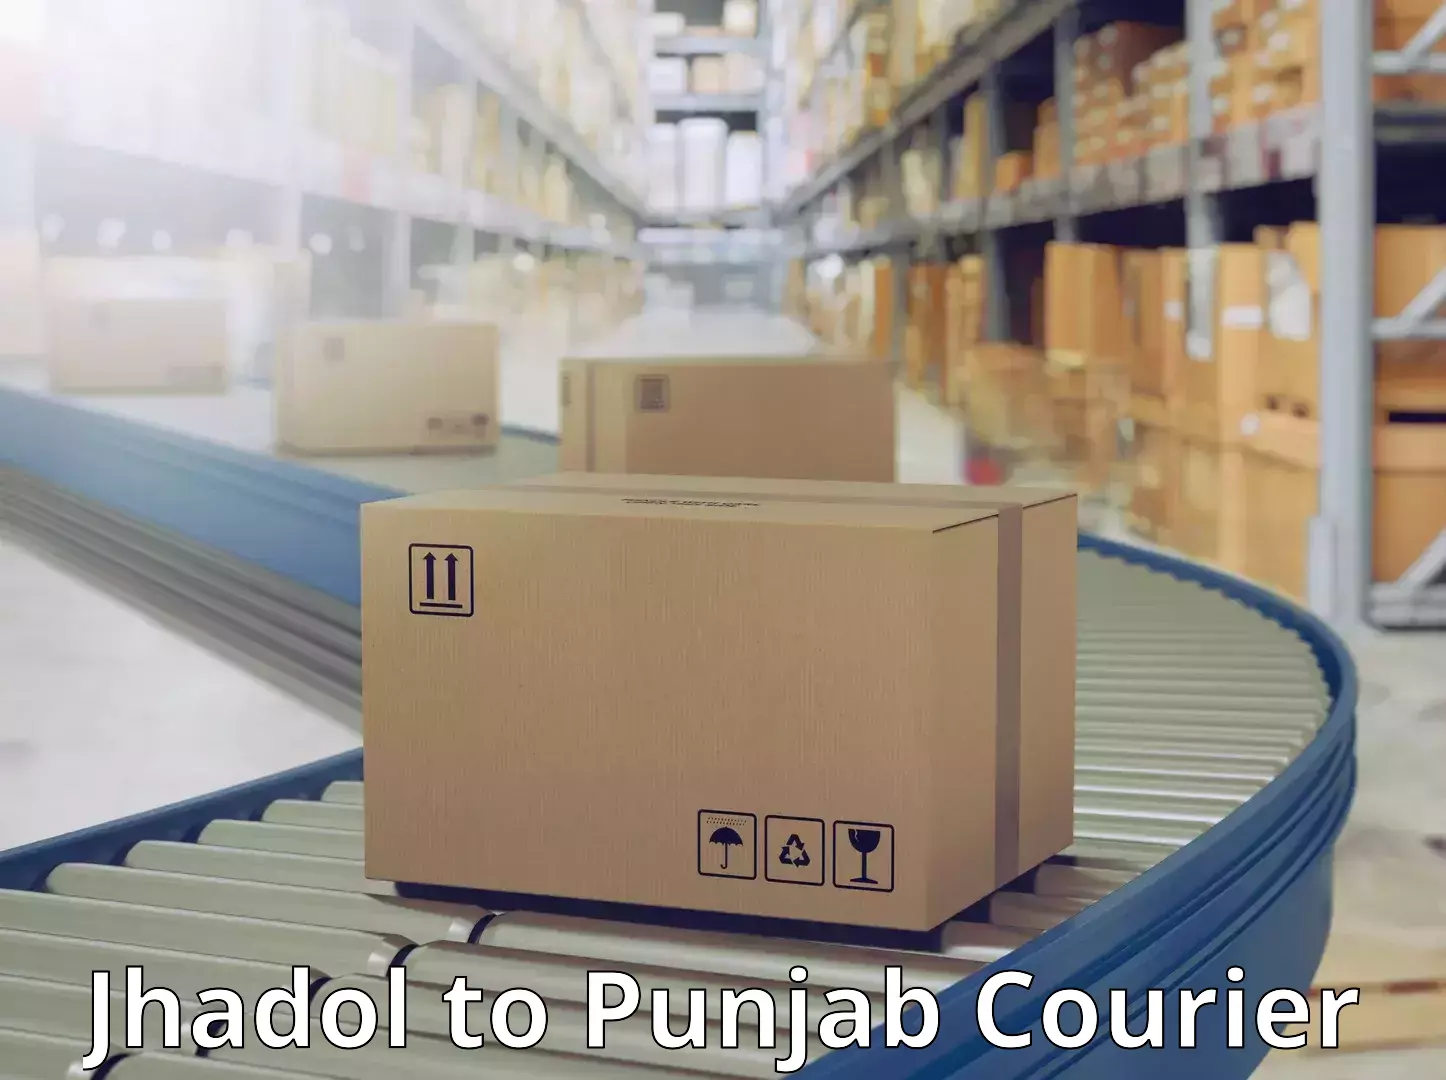 Expedited shipping methods Jhadol to Dhuri